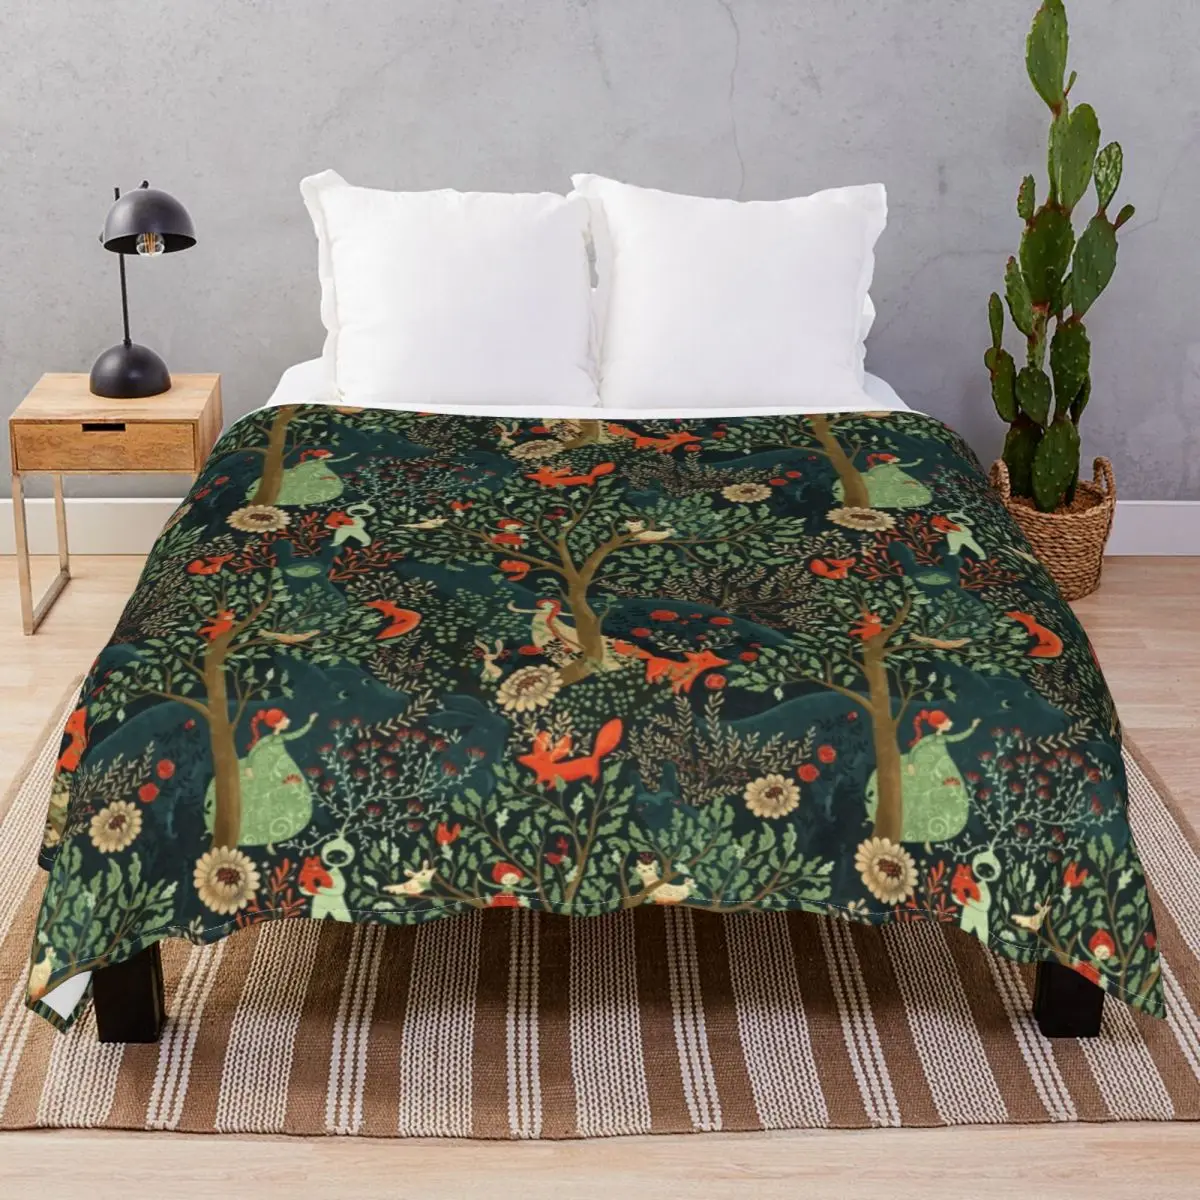 Whimsical Wonderland Blankets Flannel Spring Autumn Multifunction Throw Blanket for Bedding Home Couch Camp Cinema